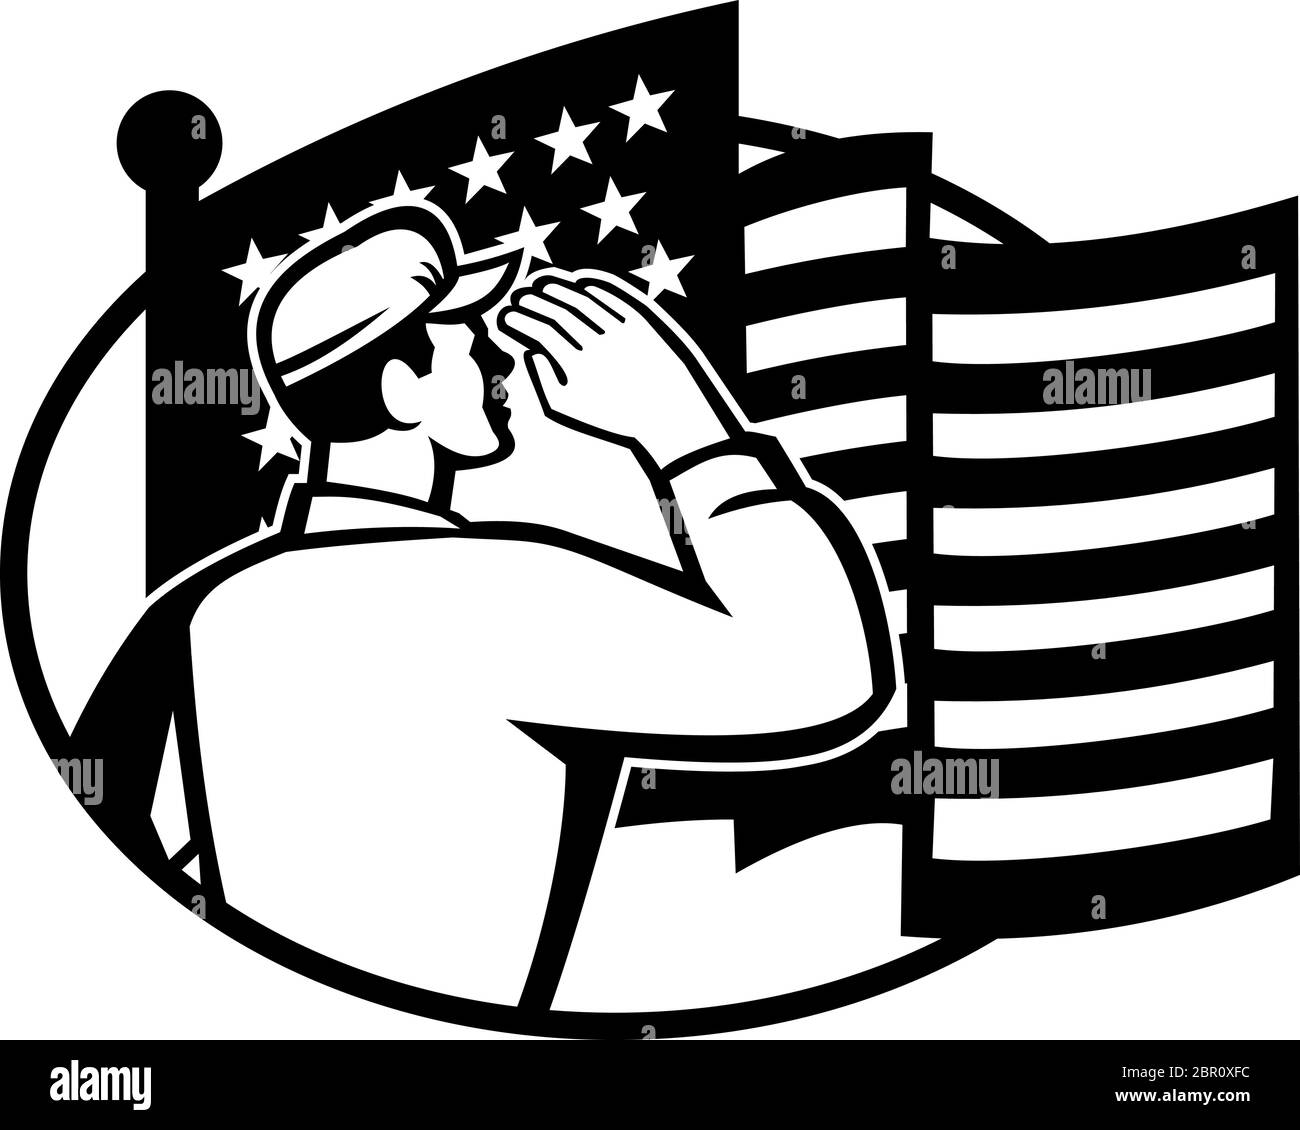 Black and White Illustration of an American soldier serviceman saluting USA stars and stripes flag viewed from rear on Memorial Day or Veteran's Day s Stock Vector